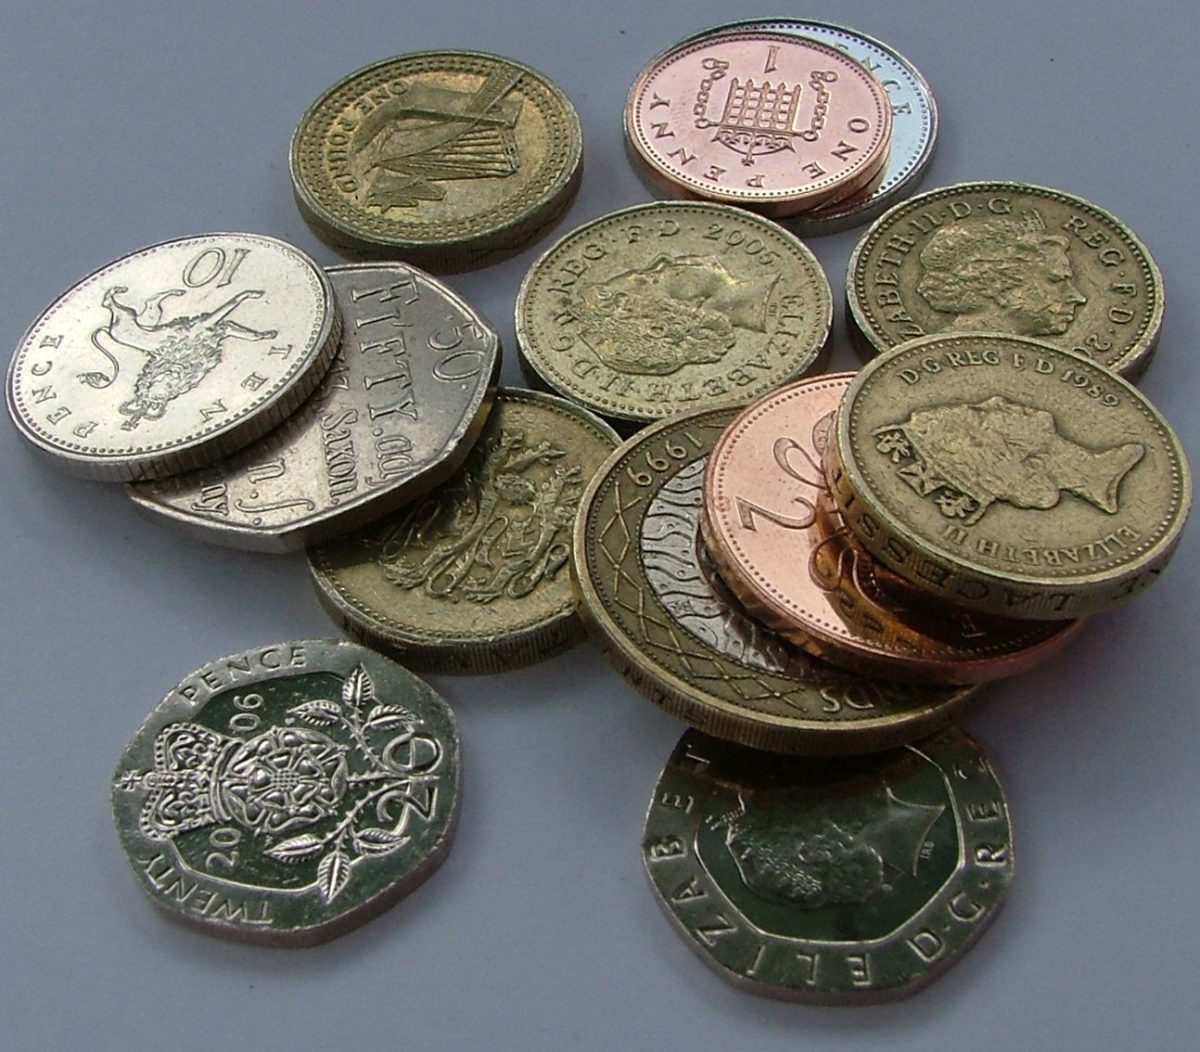 Counting Your Coins, or Rather Collecting Them: A Look at the Numismatic Club